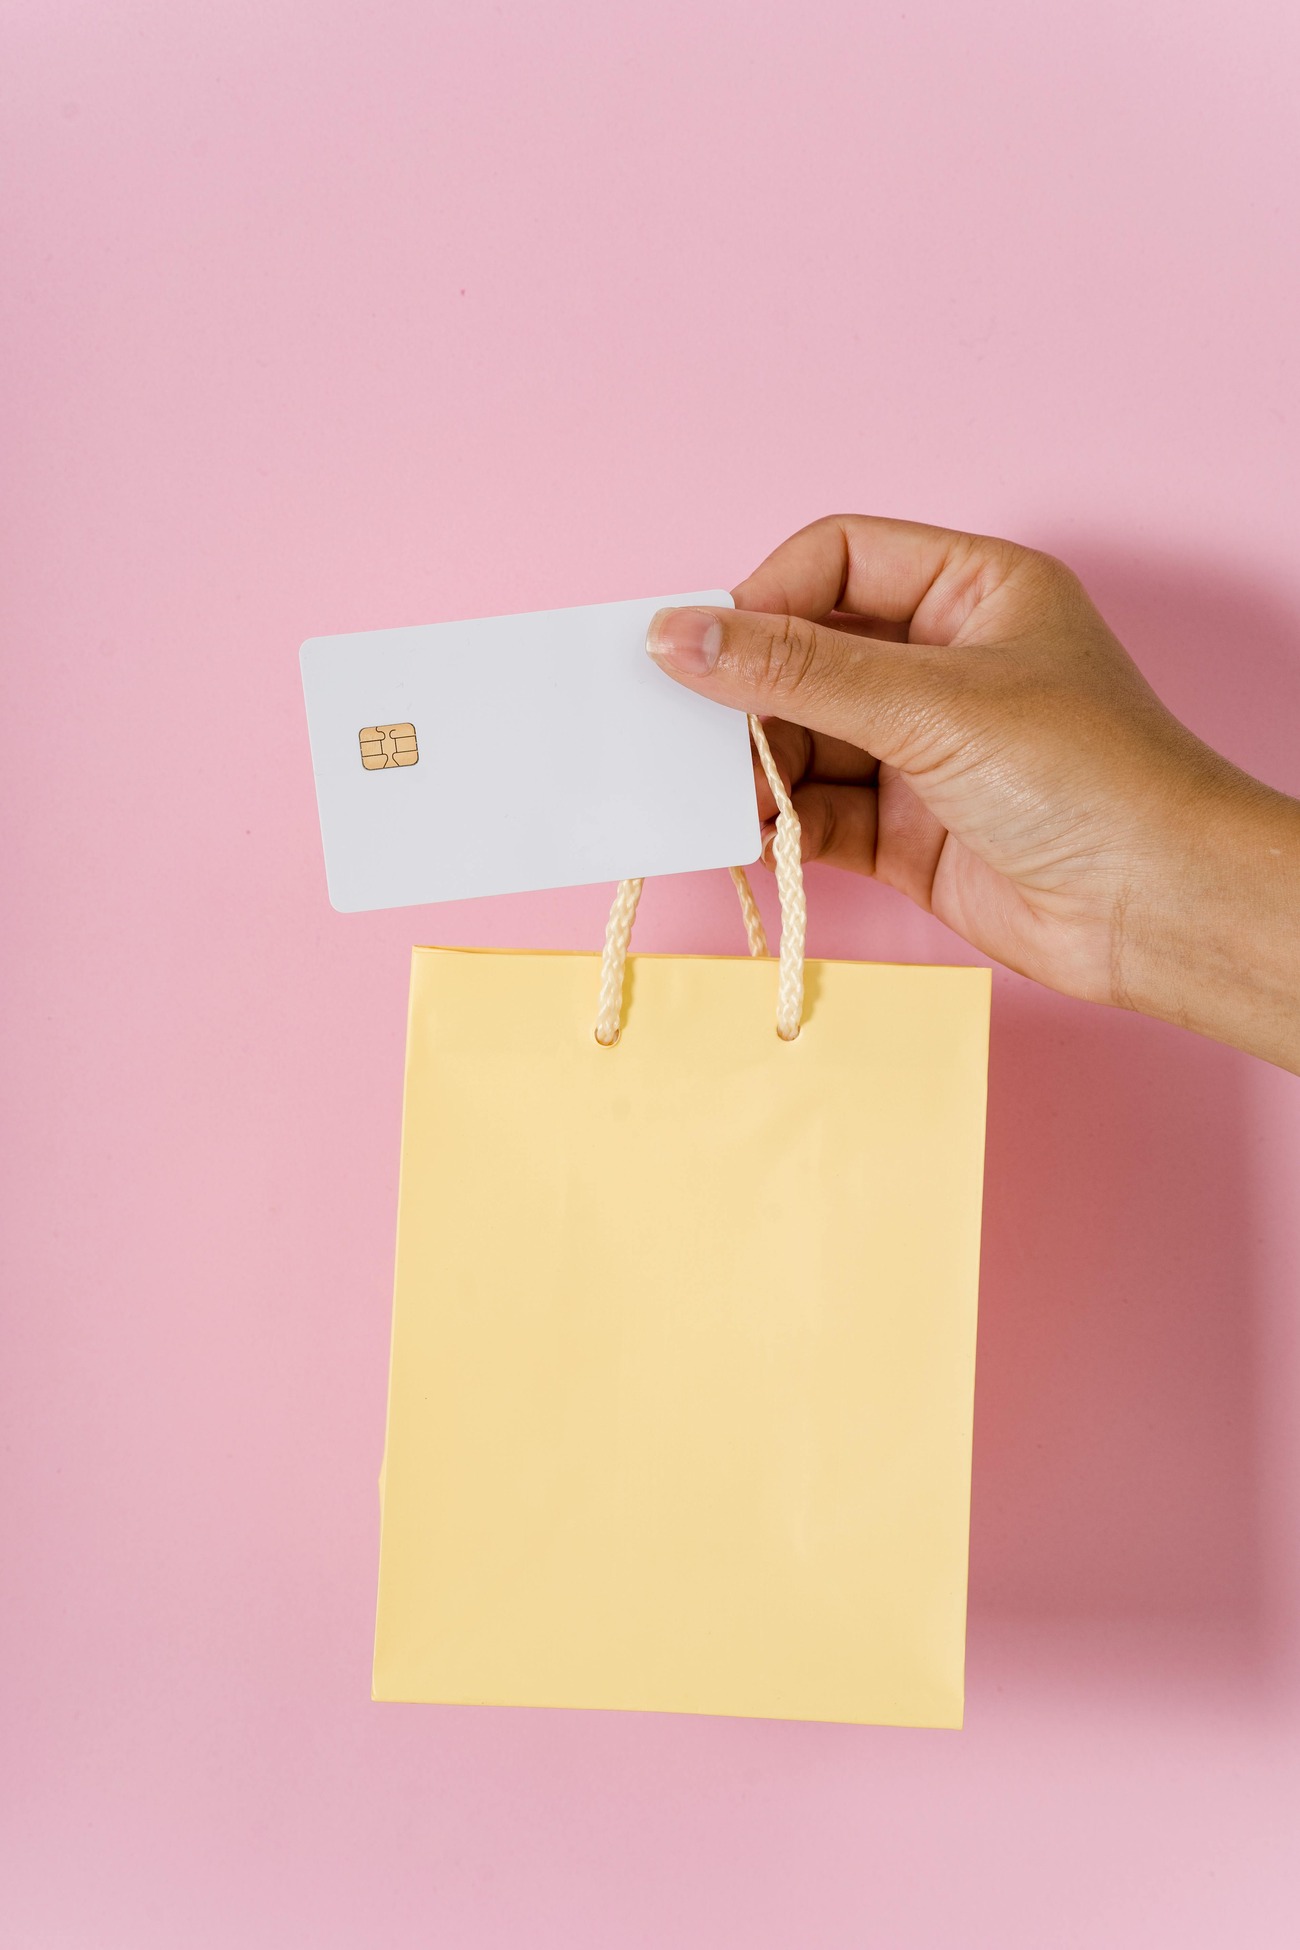 A hand holding a shopping bag with a credit card on a pink background